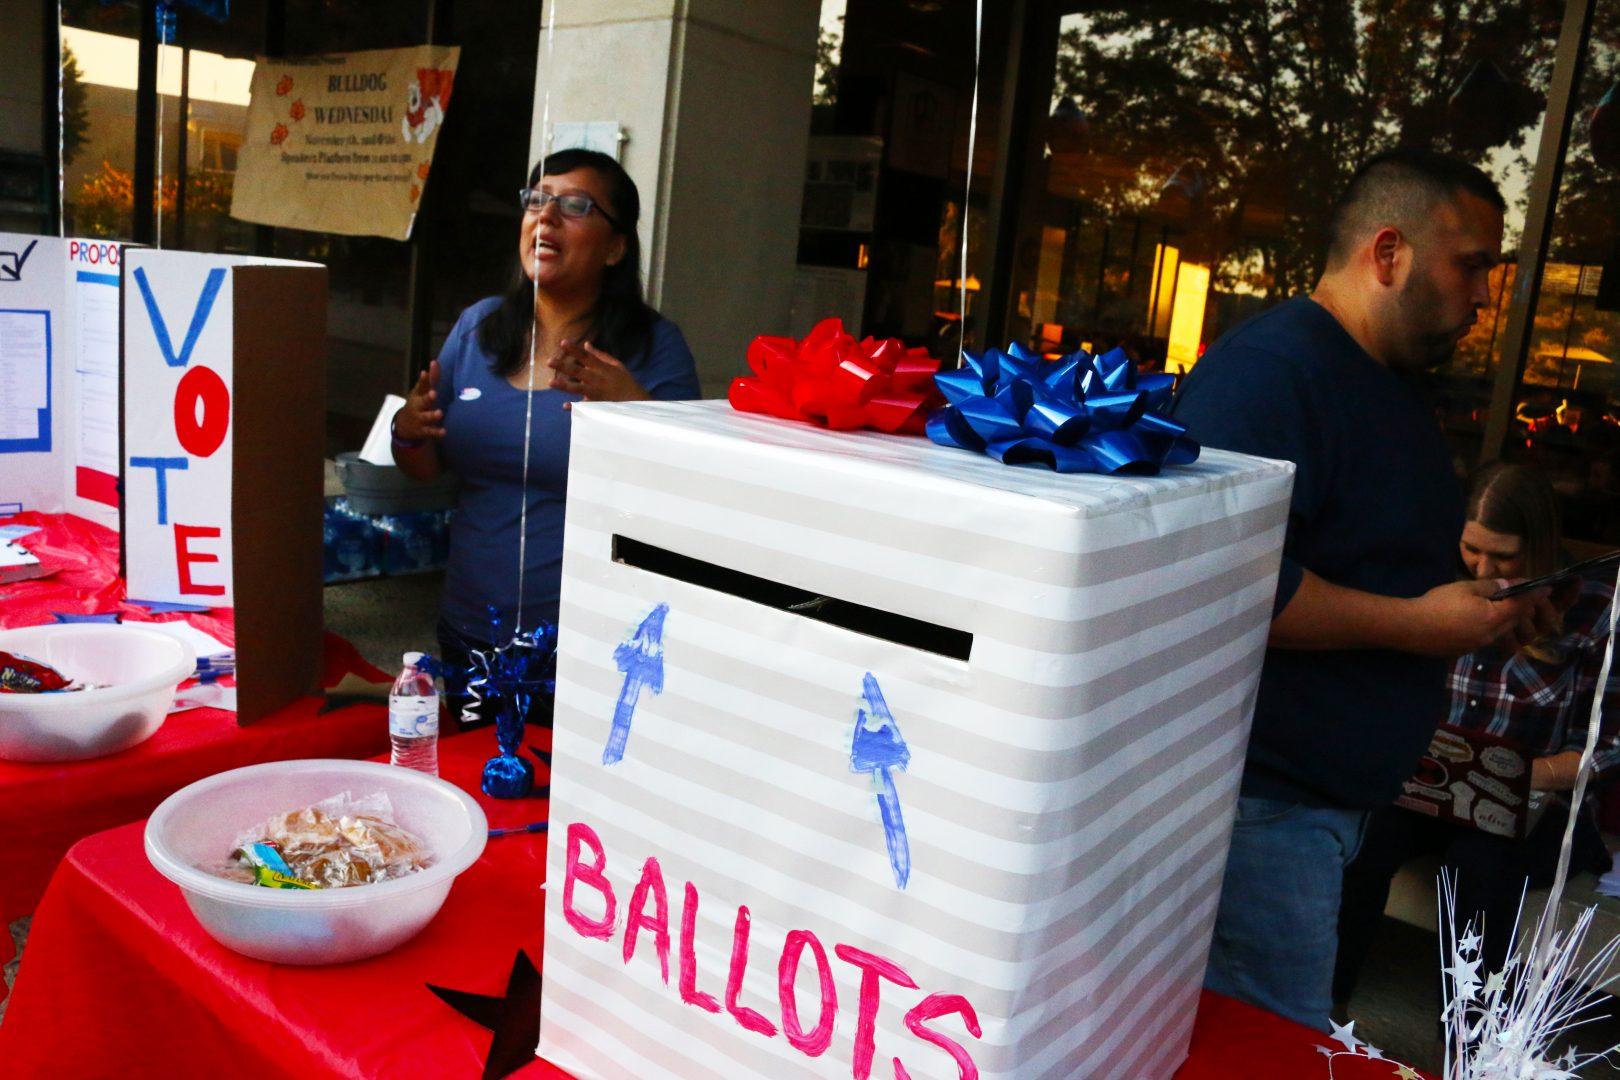 Students from Fresno States social work department hosted a ballot drop-off site on the balcony of the Fresno State University Student Union on Tuesday, Nov. 6, 2018 for the midterm elections. 